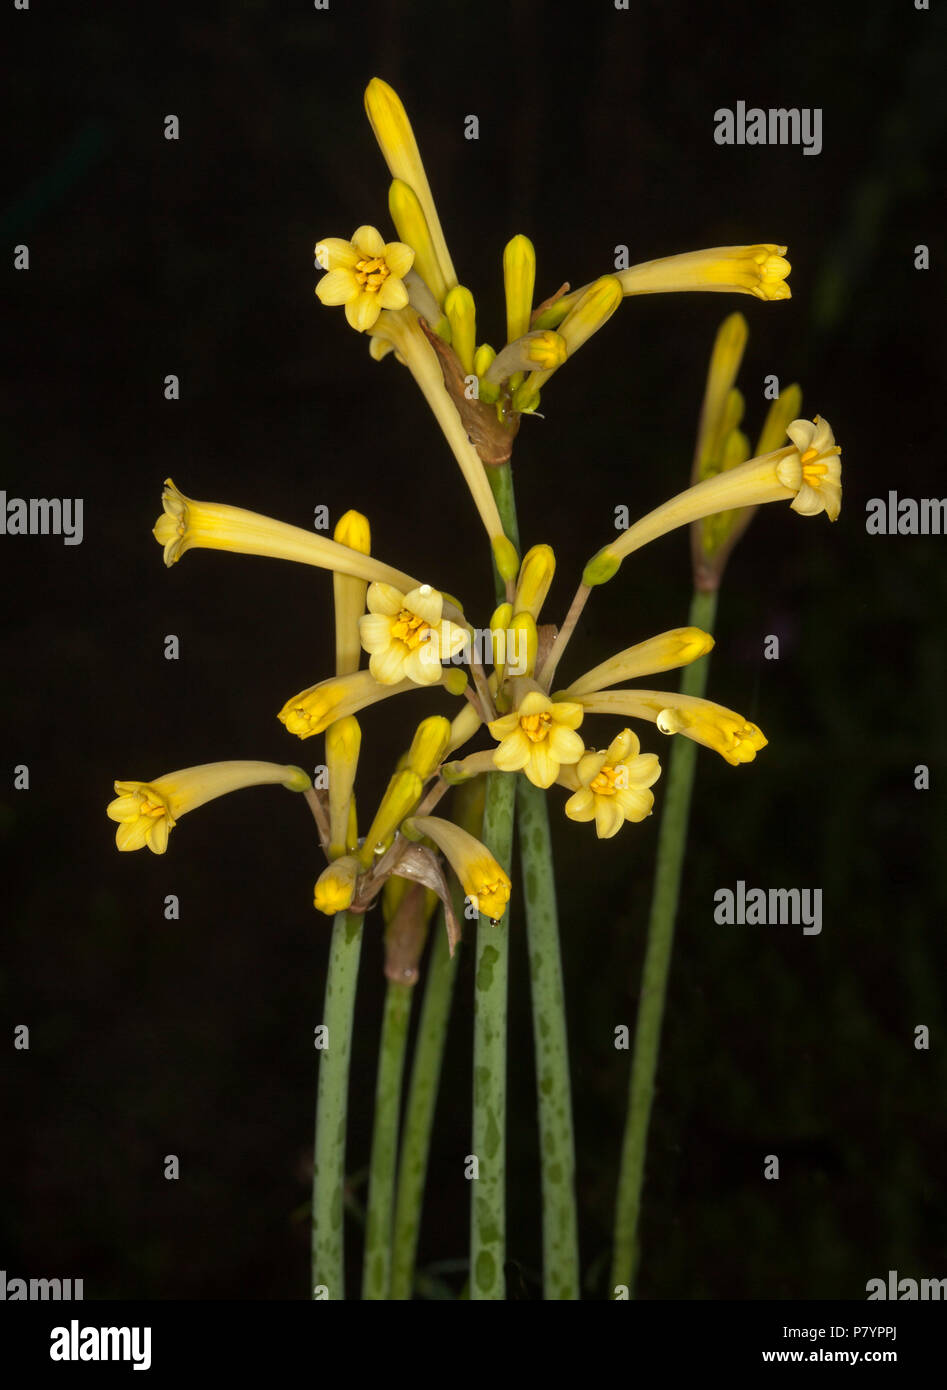 Cluster of yellow flowers of Crytanthus mackenii cultivar, South African Fire Lily, a winter flowering bulb, on black background Stock Photo